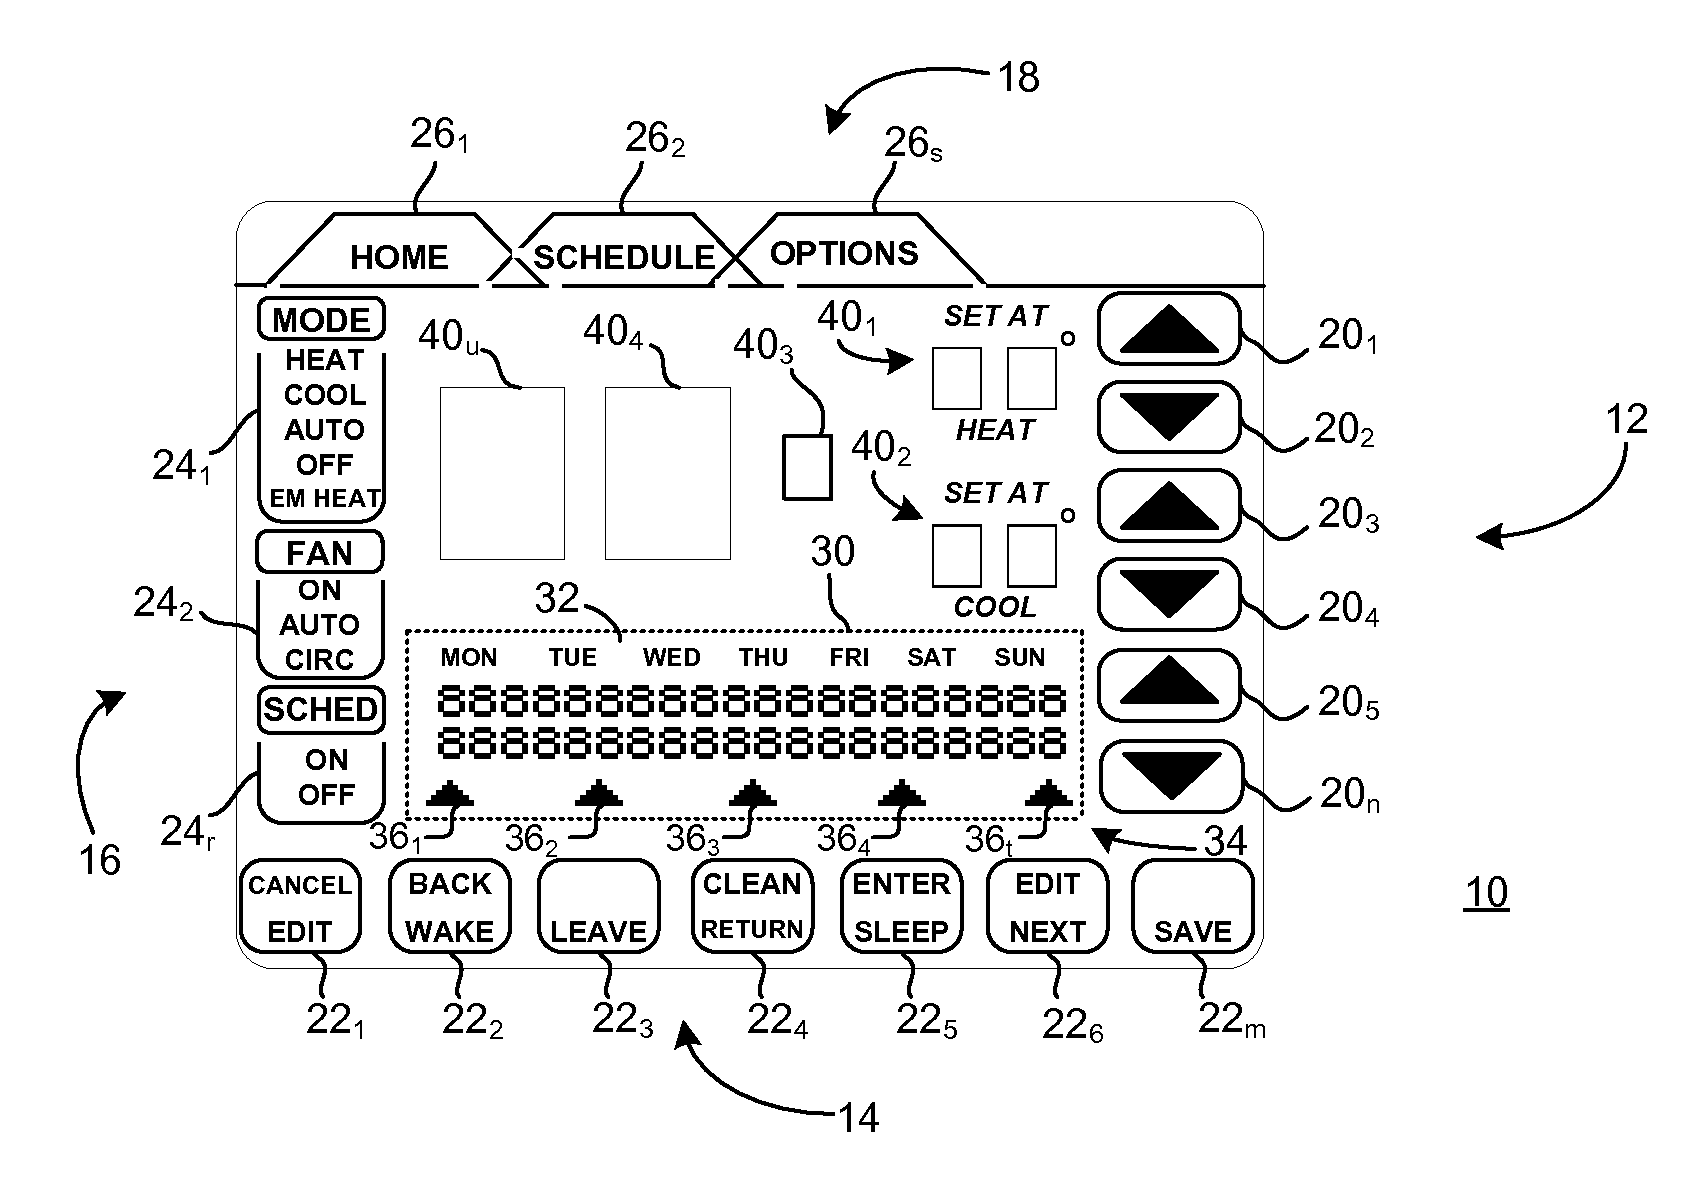 Display apparatus and method for a control unit for an environmental control system